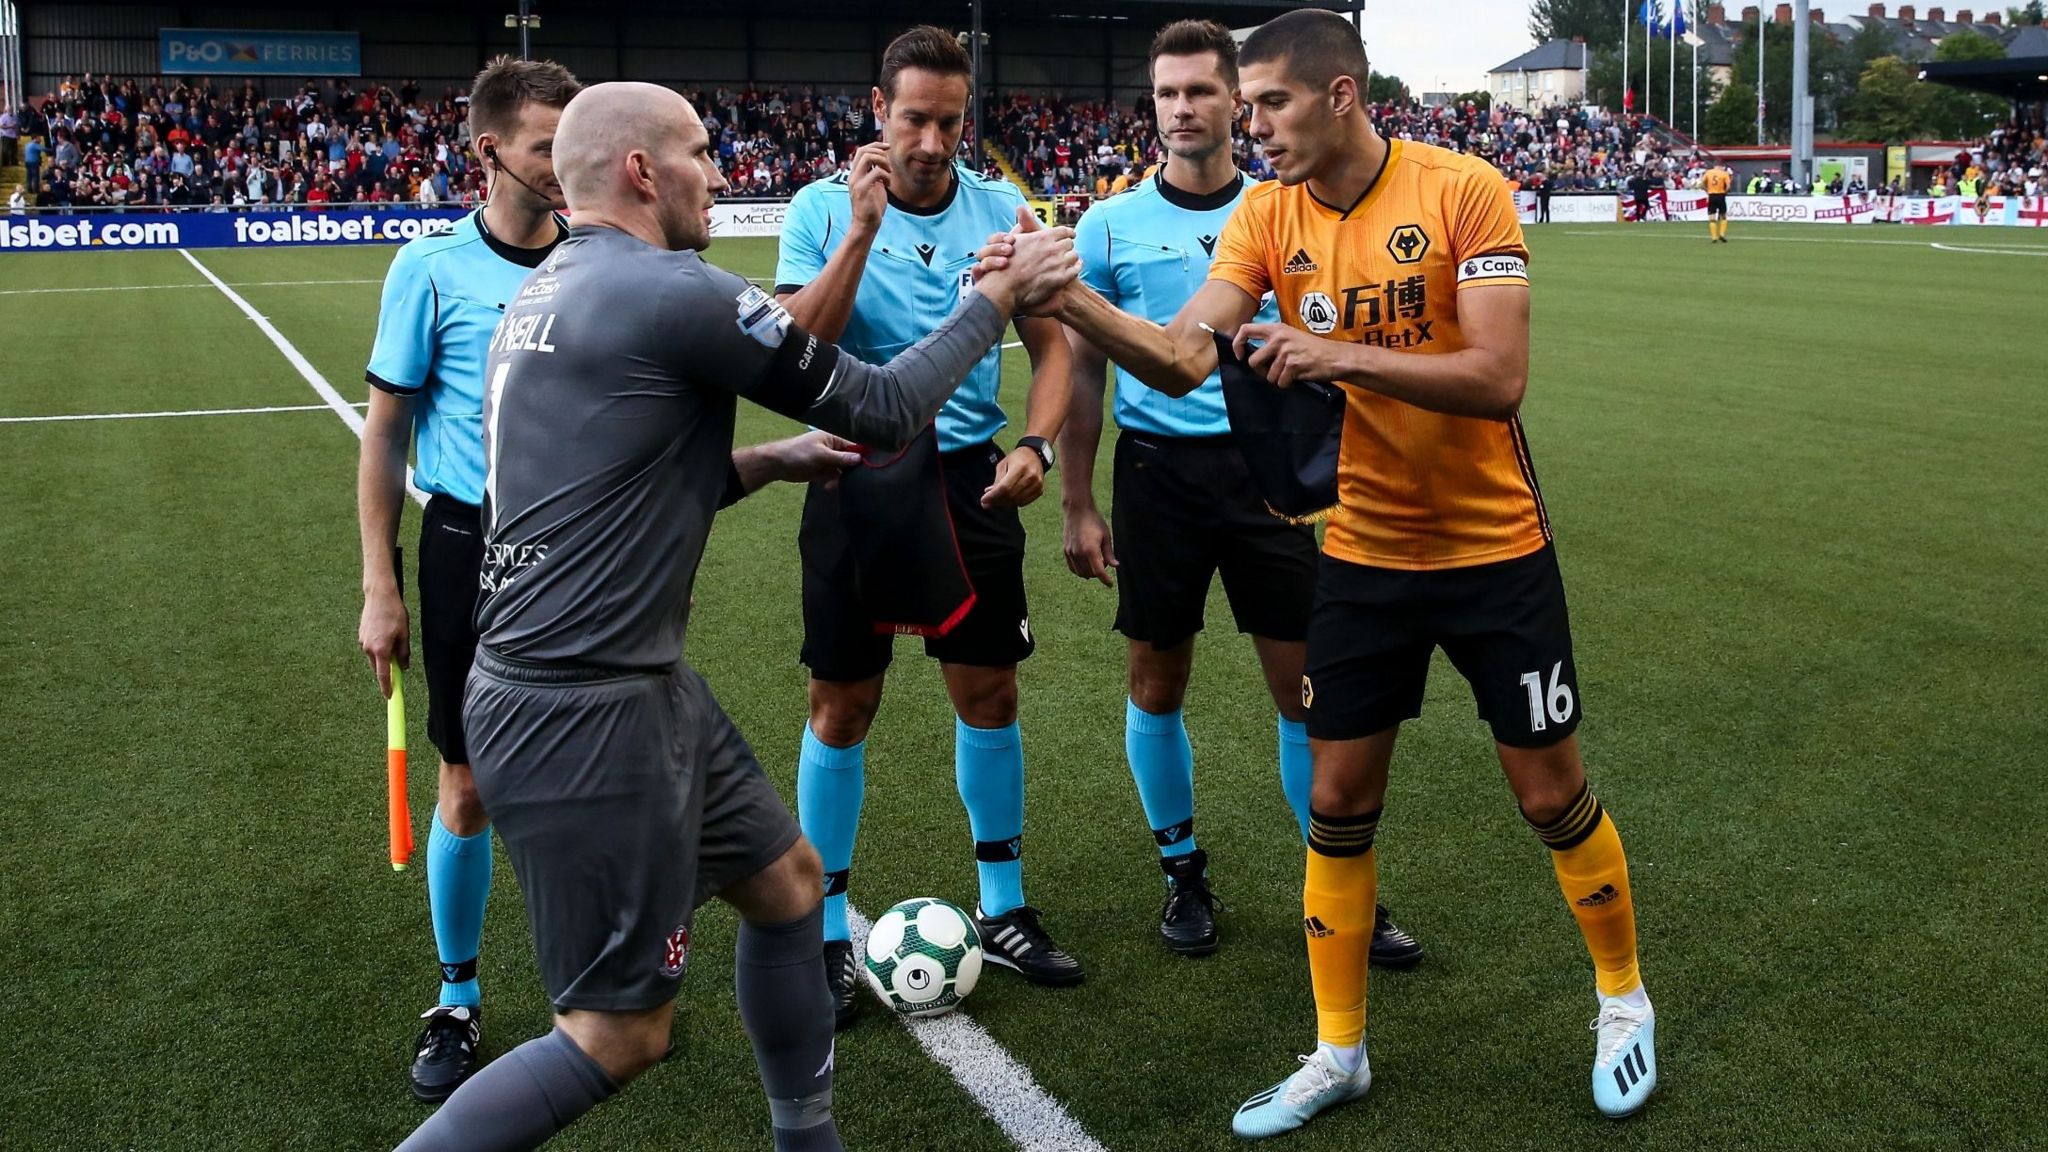 Crusaders captain Sean O'Neil shakes hands with Wolves captain Conor Coady